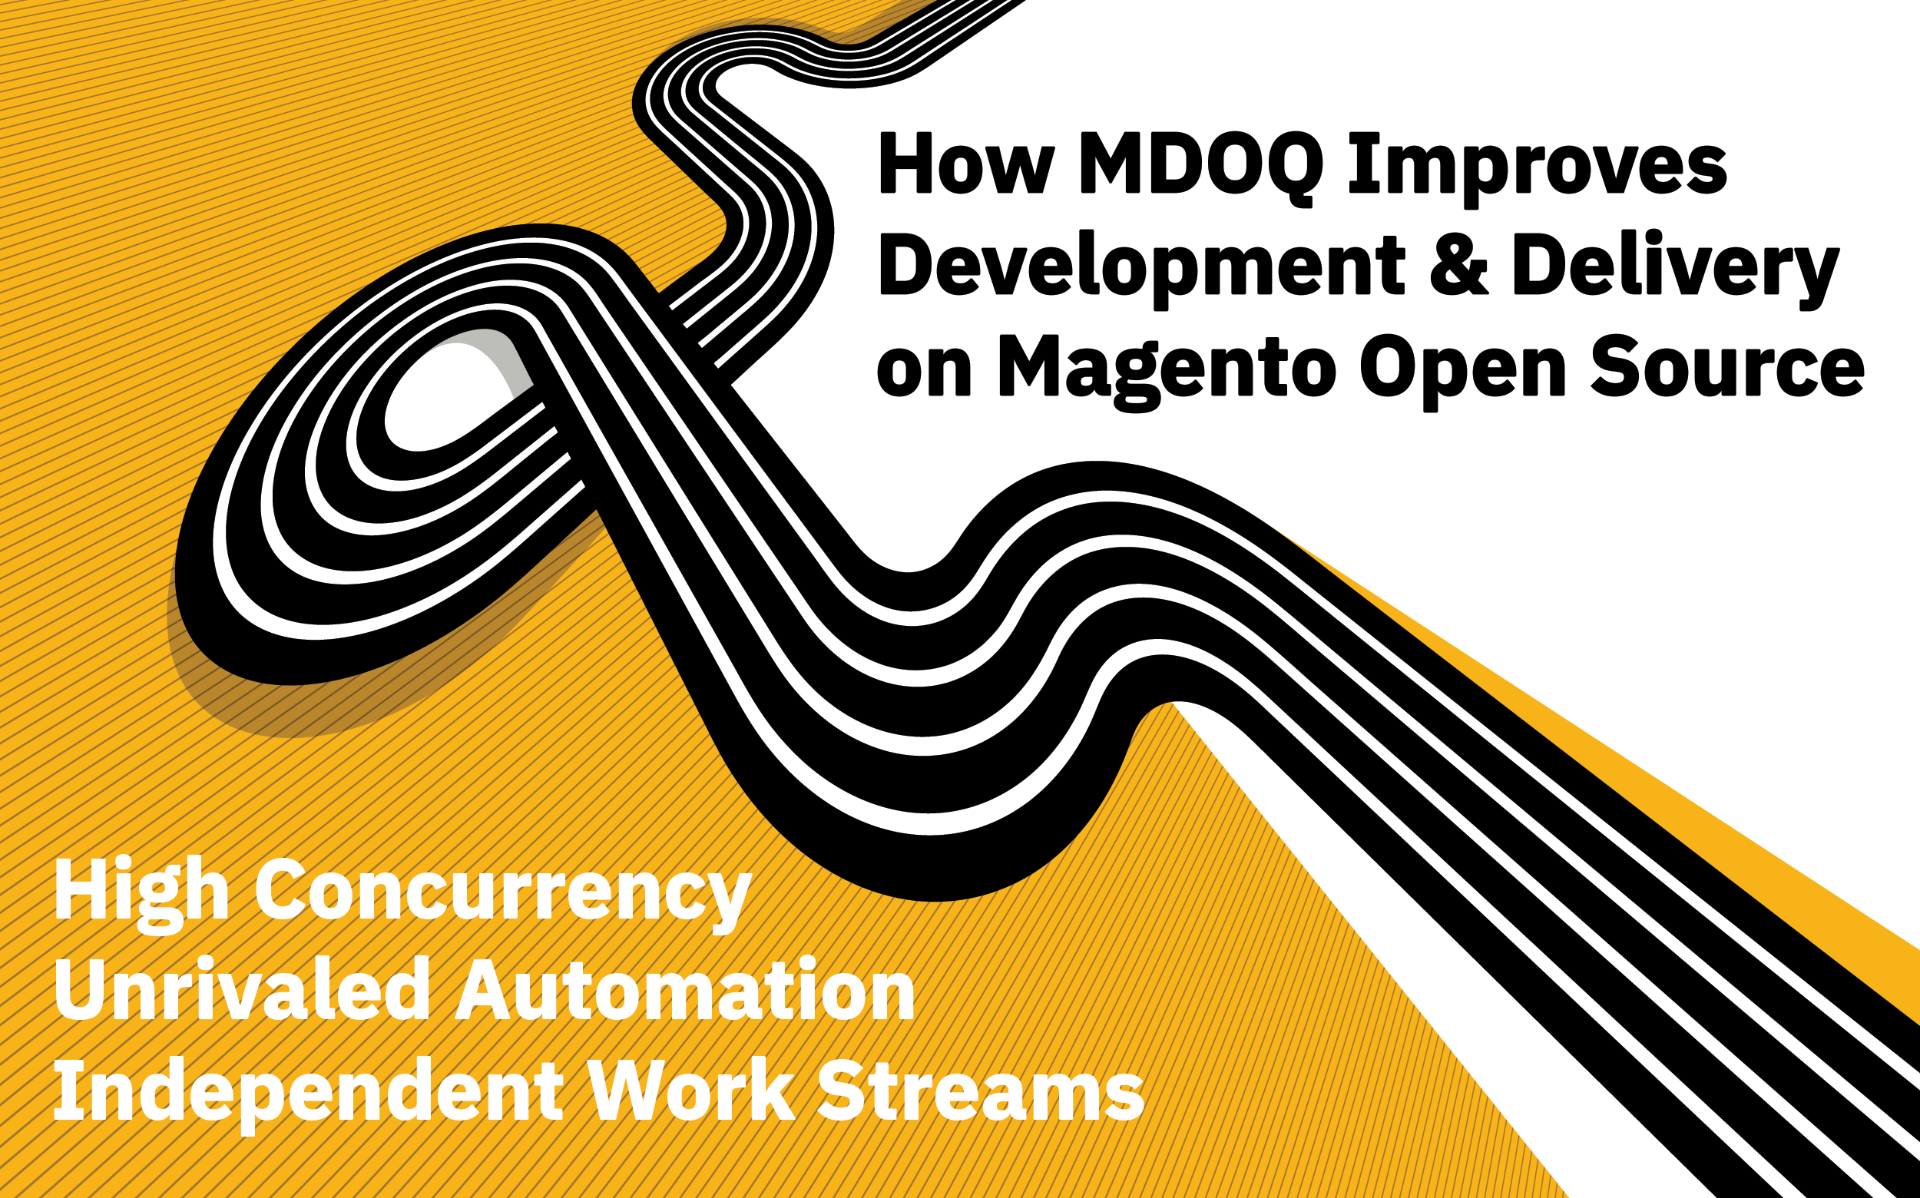 Using MDOQ to Improve Development & Delivery on Magento Open Source